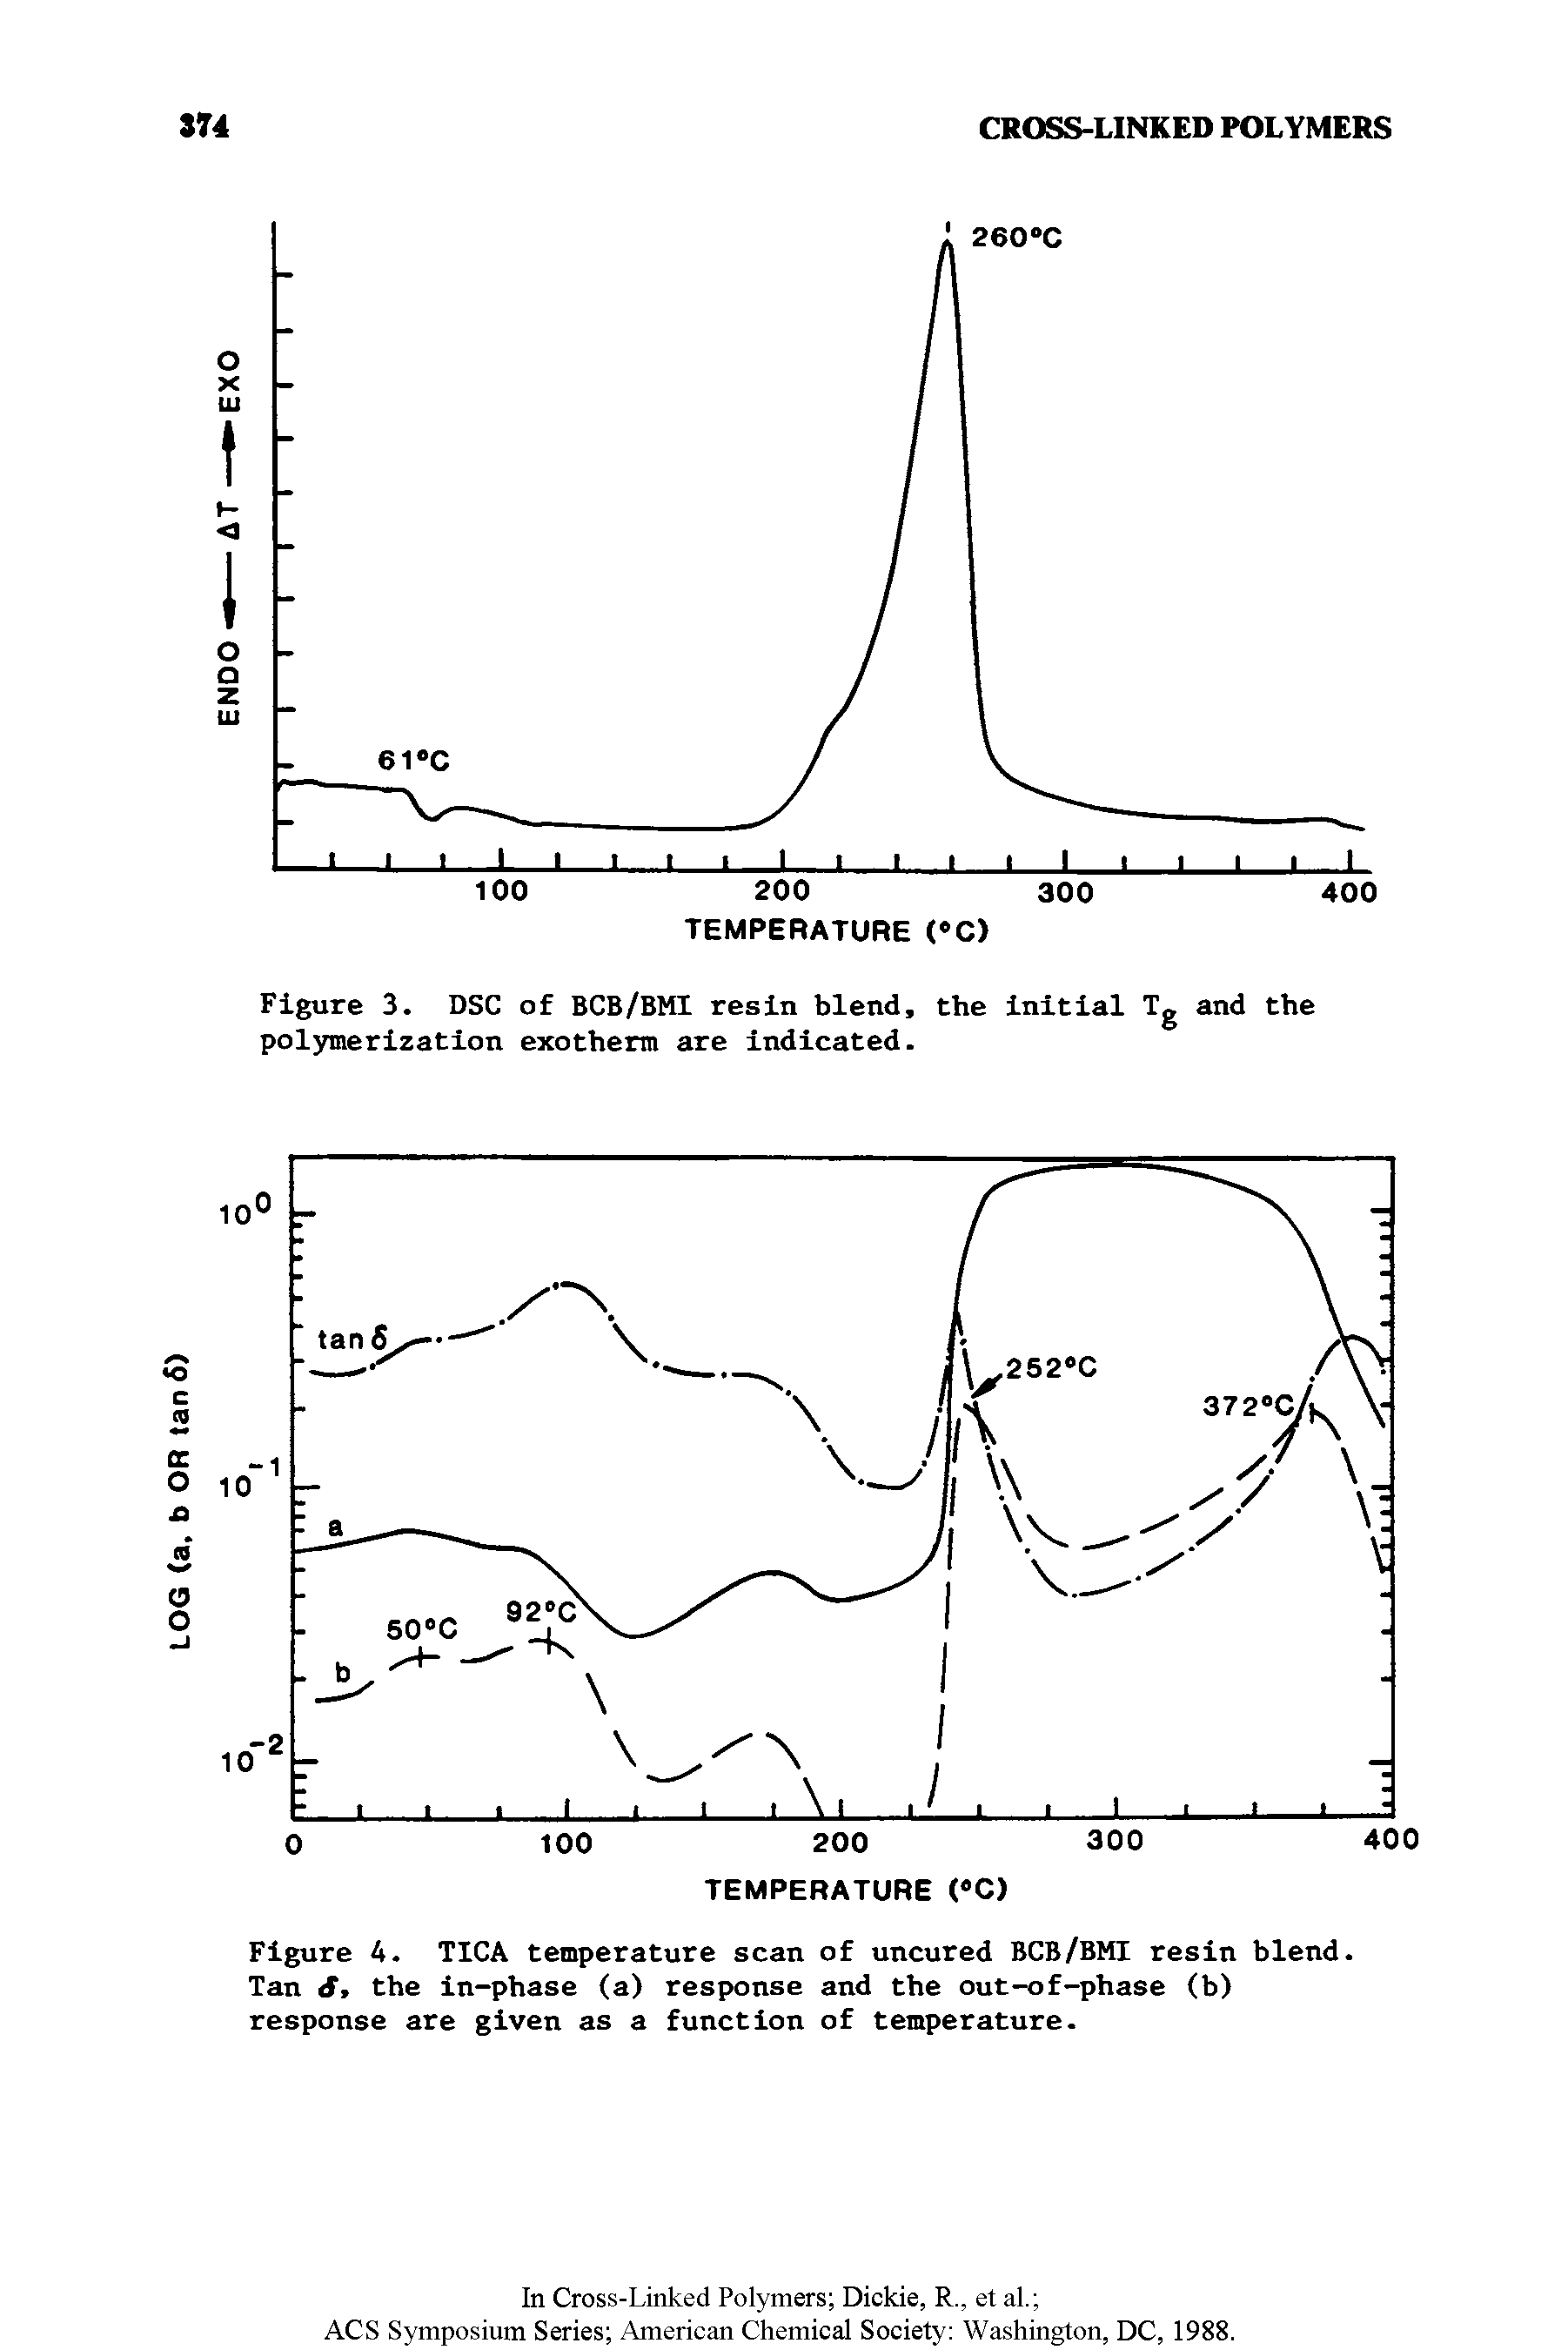 Figure 4. TICA temperature scan of uncured BCB/BMI resin blend. Tan the in-phase (a) response and the out-of-phase (b) response are given as a function of temperature.